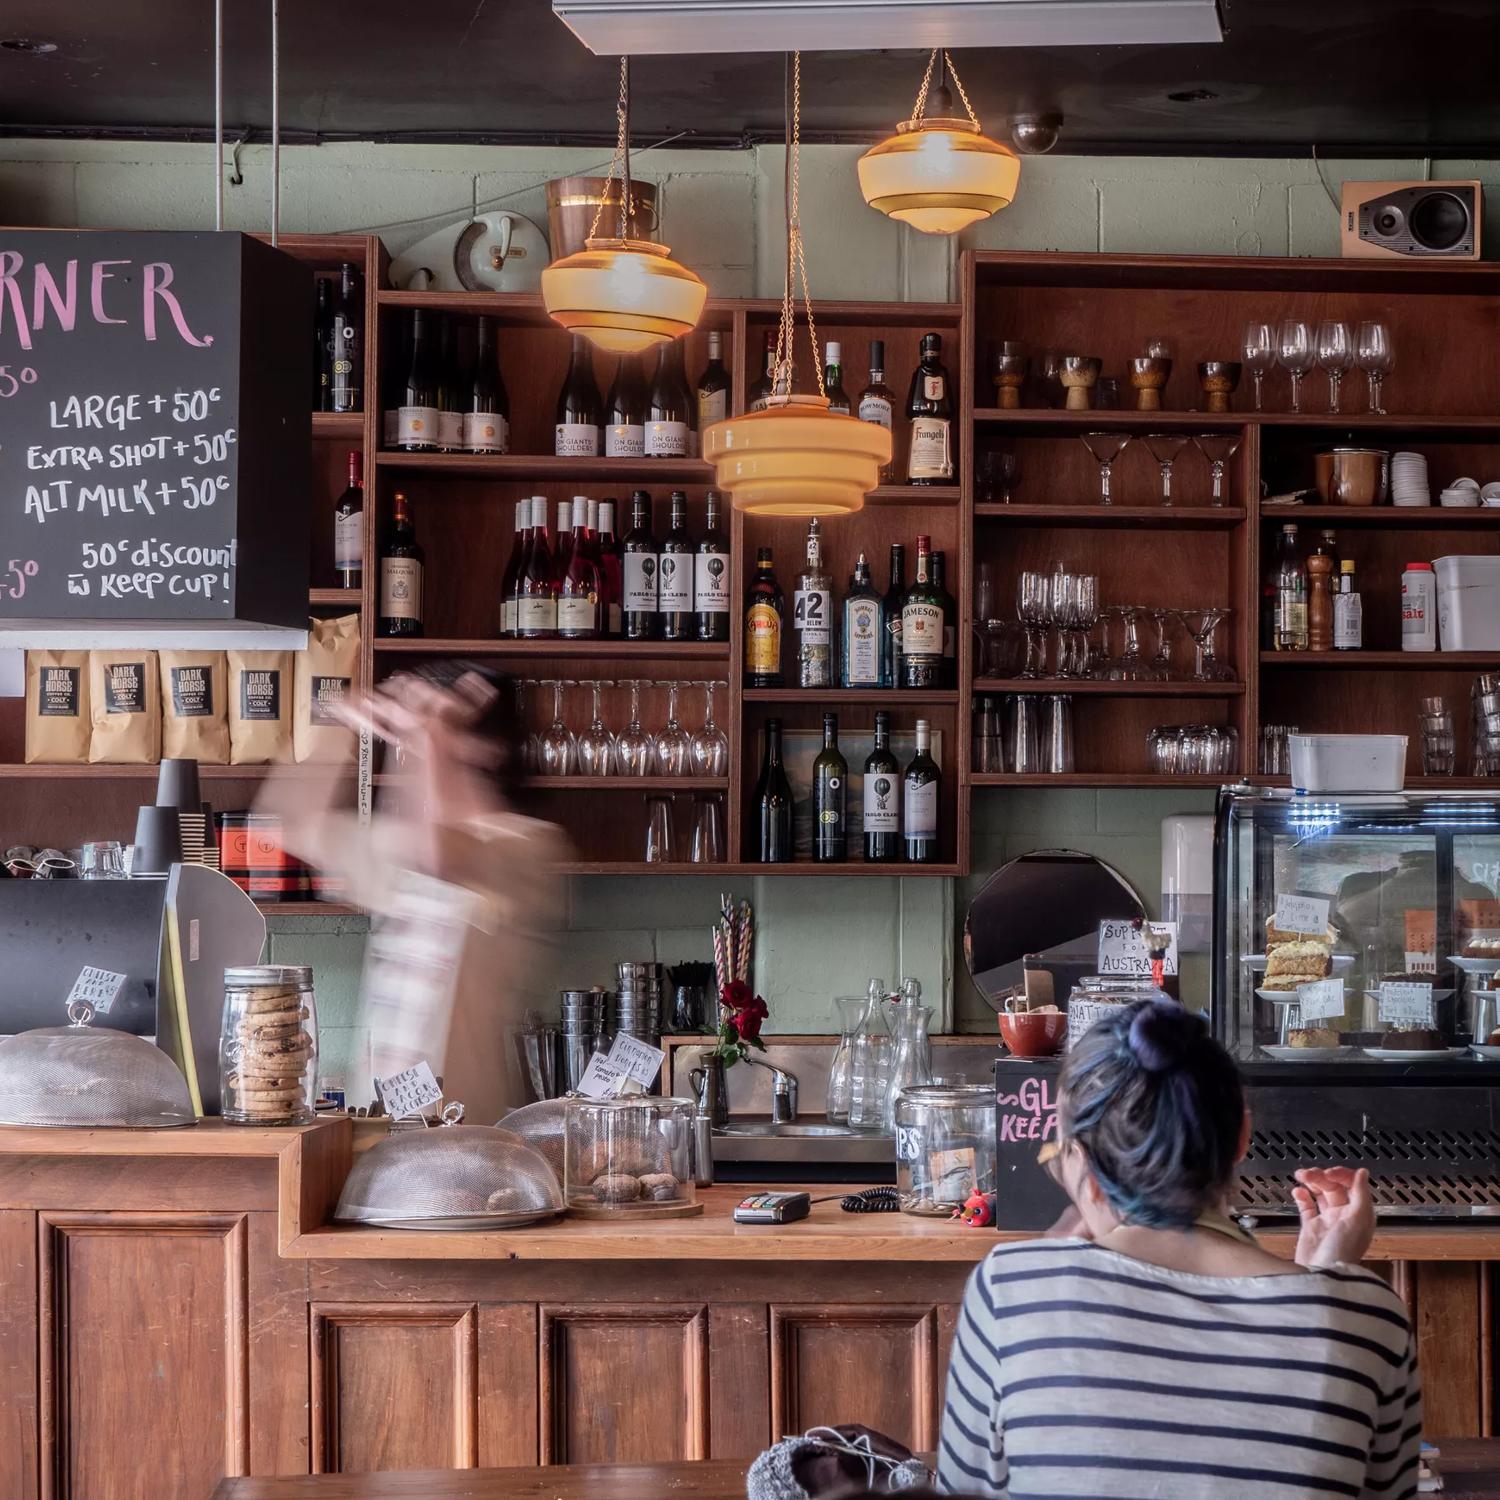 The interior of Raumati social club, customers sitting at tables and the bar staff making drinks behind the bar. A shelf of wine and spirit bottles is seen behind the bar.